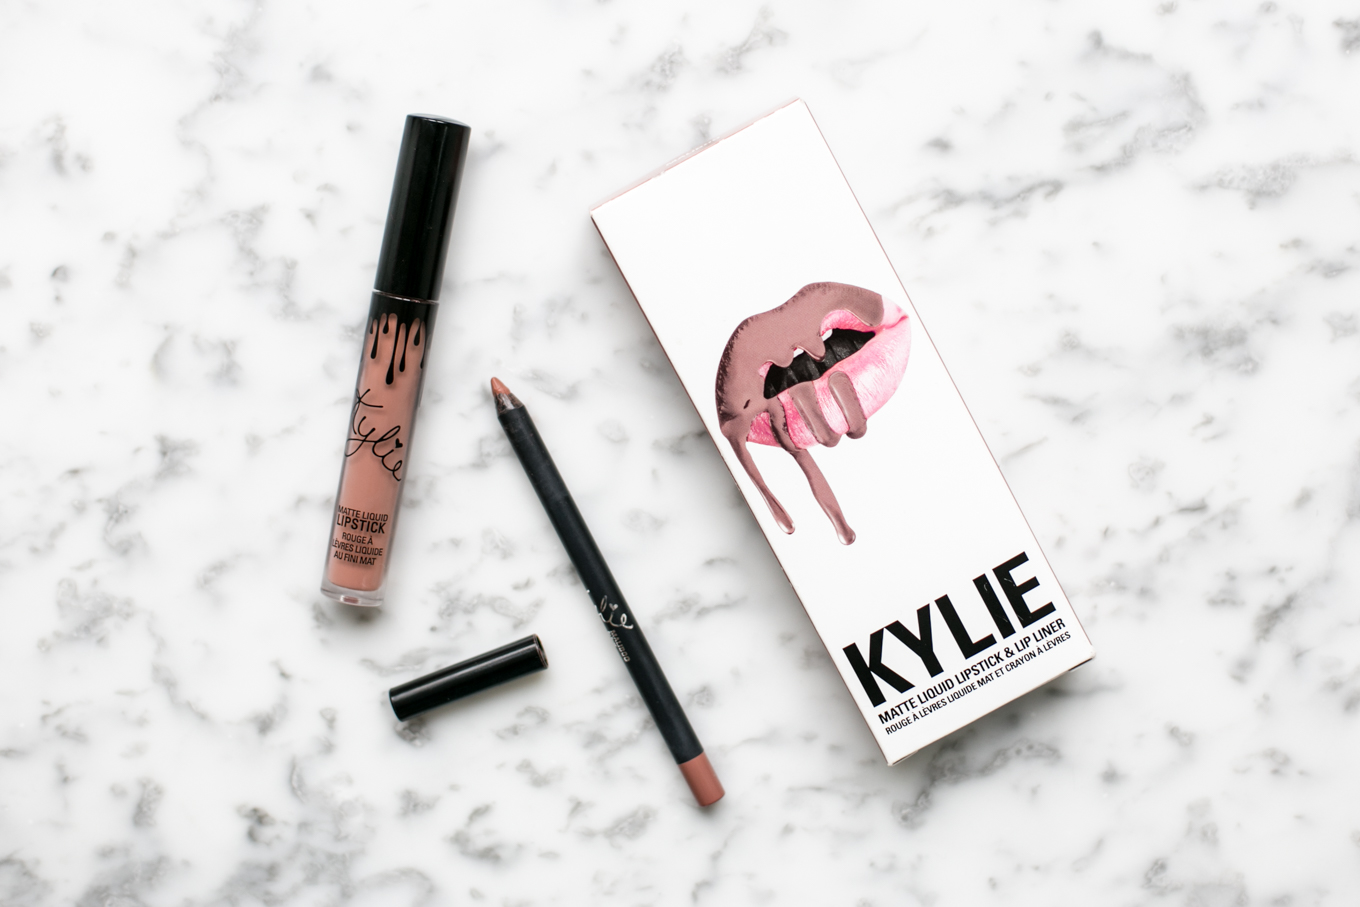 Kylie-Jenner-Lipkit-Review-Swatches-10